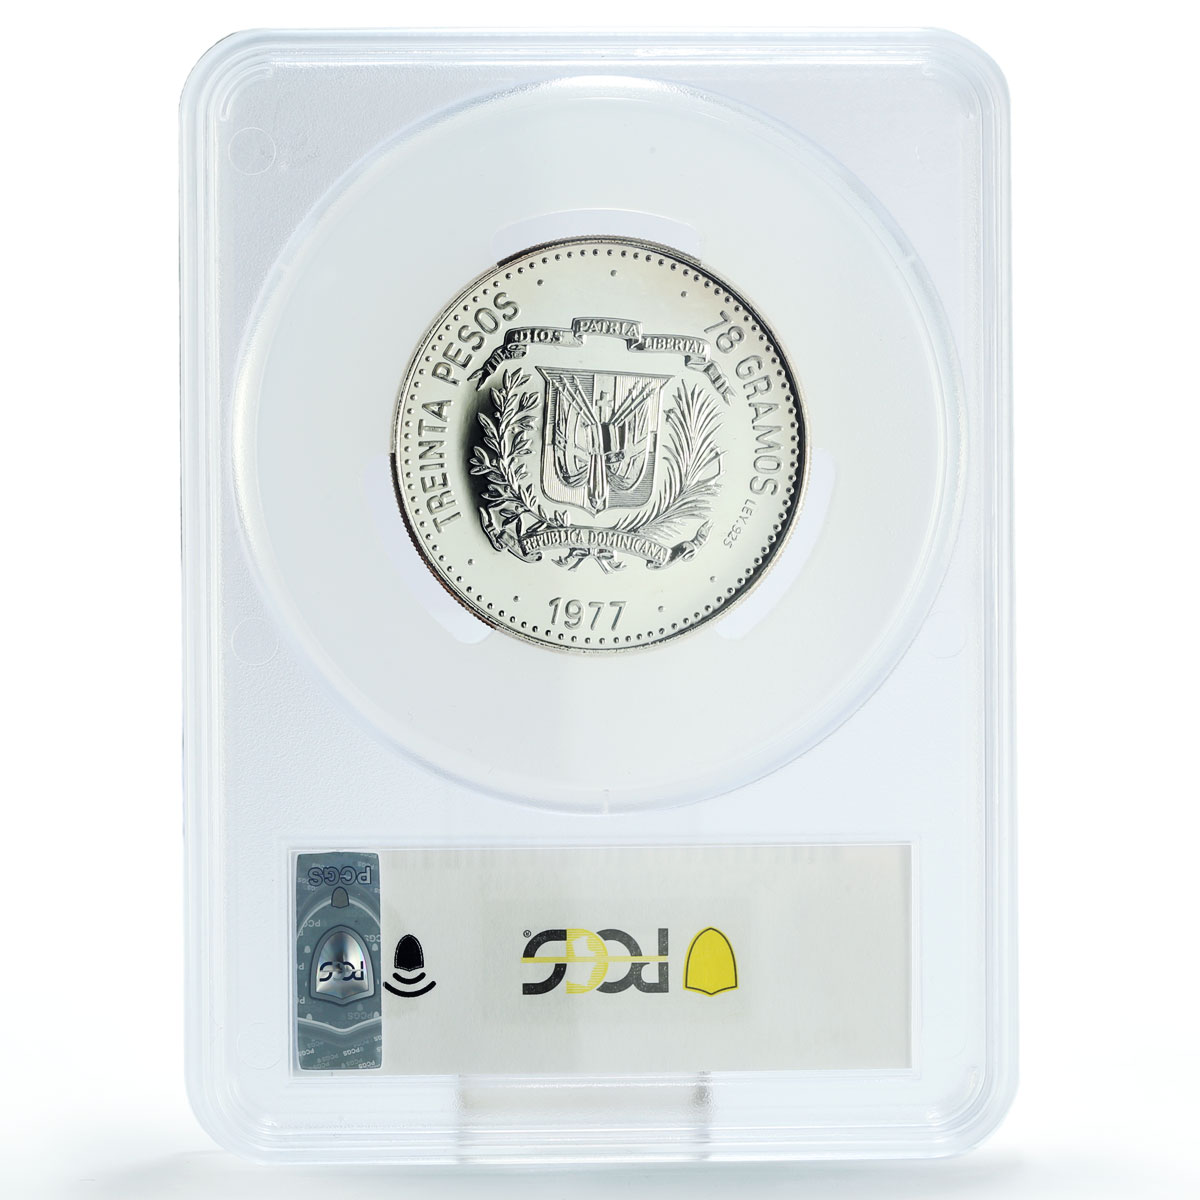 Dominican Rep. 30 pesos Central Bank 30th Anniversary MS69 PCGS silver coin 1977